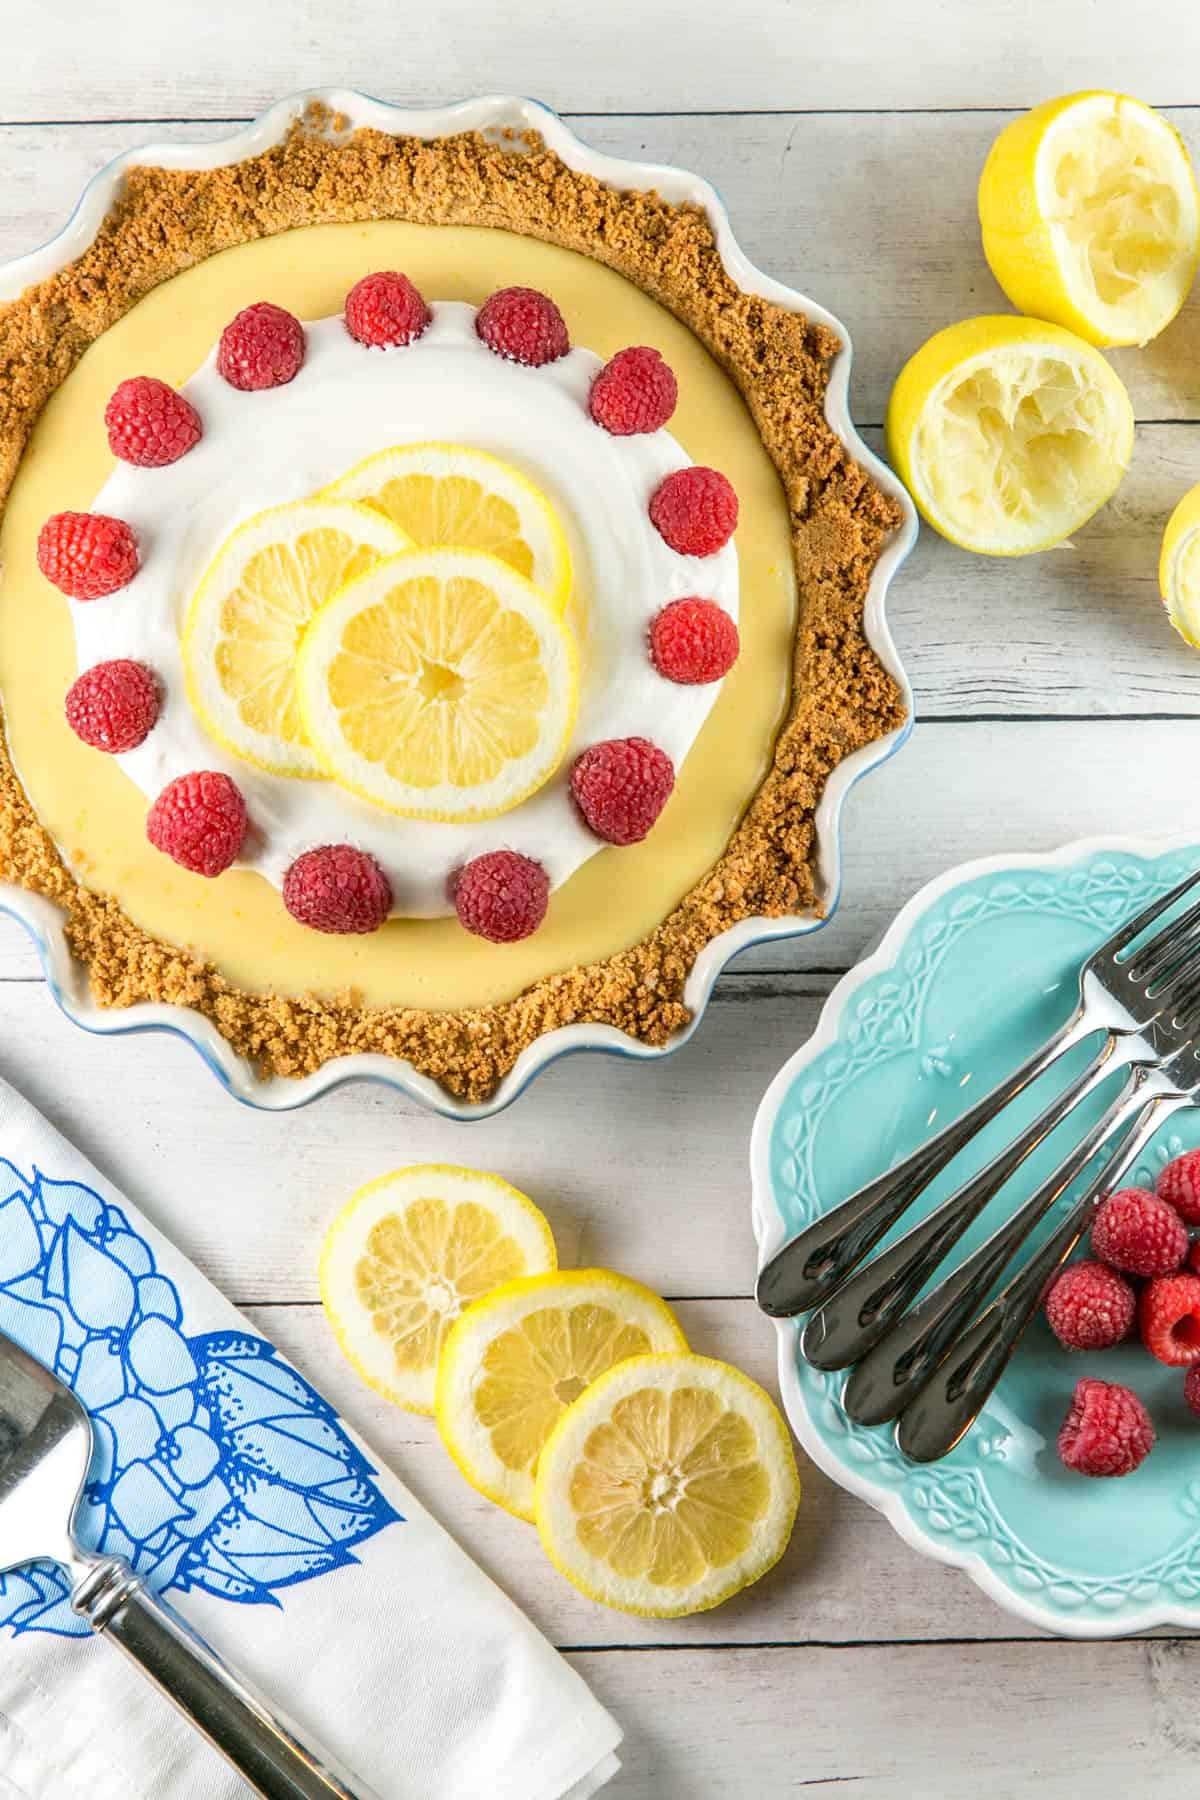 Lemon Pie: Silky smooth and sweet-tart, this easy make-ahead lemon pie is the perfect spring and summer dessert. Only 3 ingredients for a delicious baked lemon custard! {Bunsen Burner Bakery} #pie #lemonpie #easydesserts